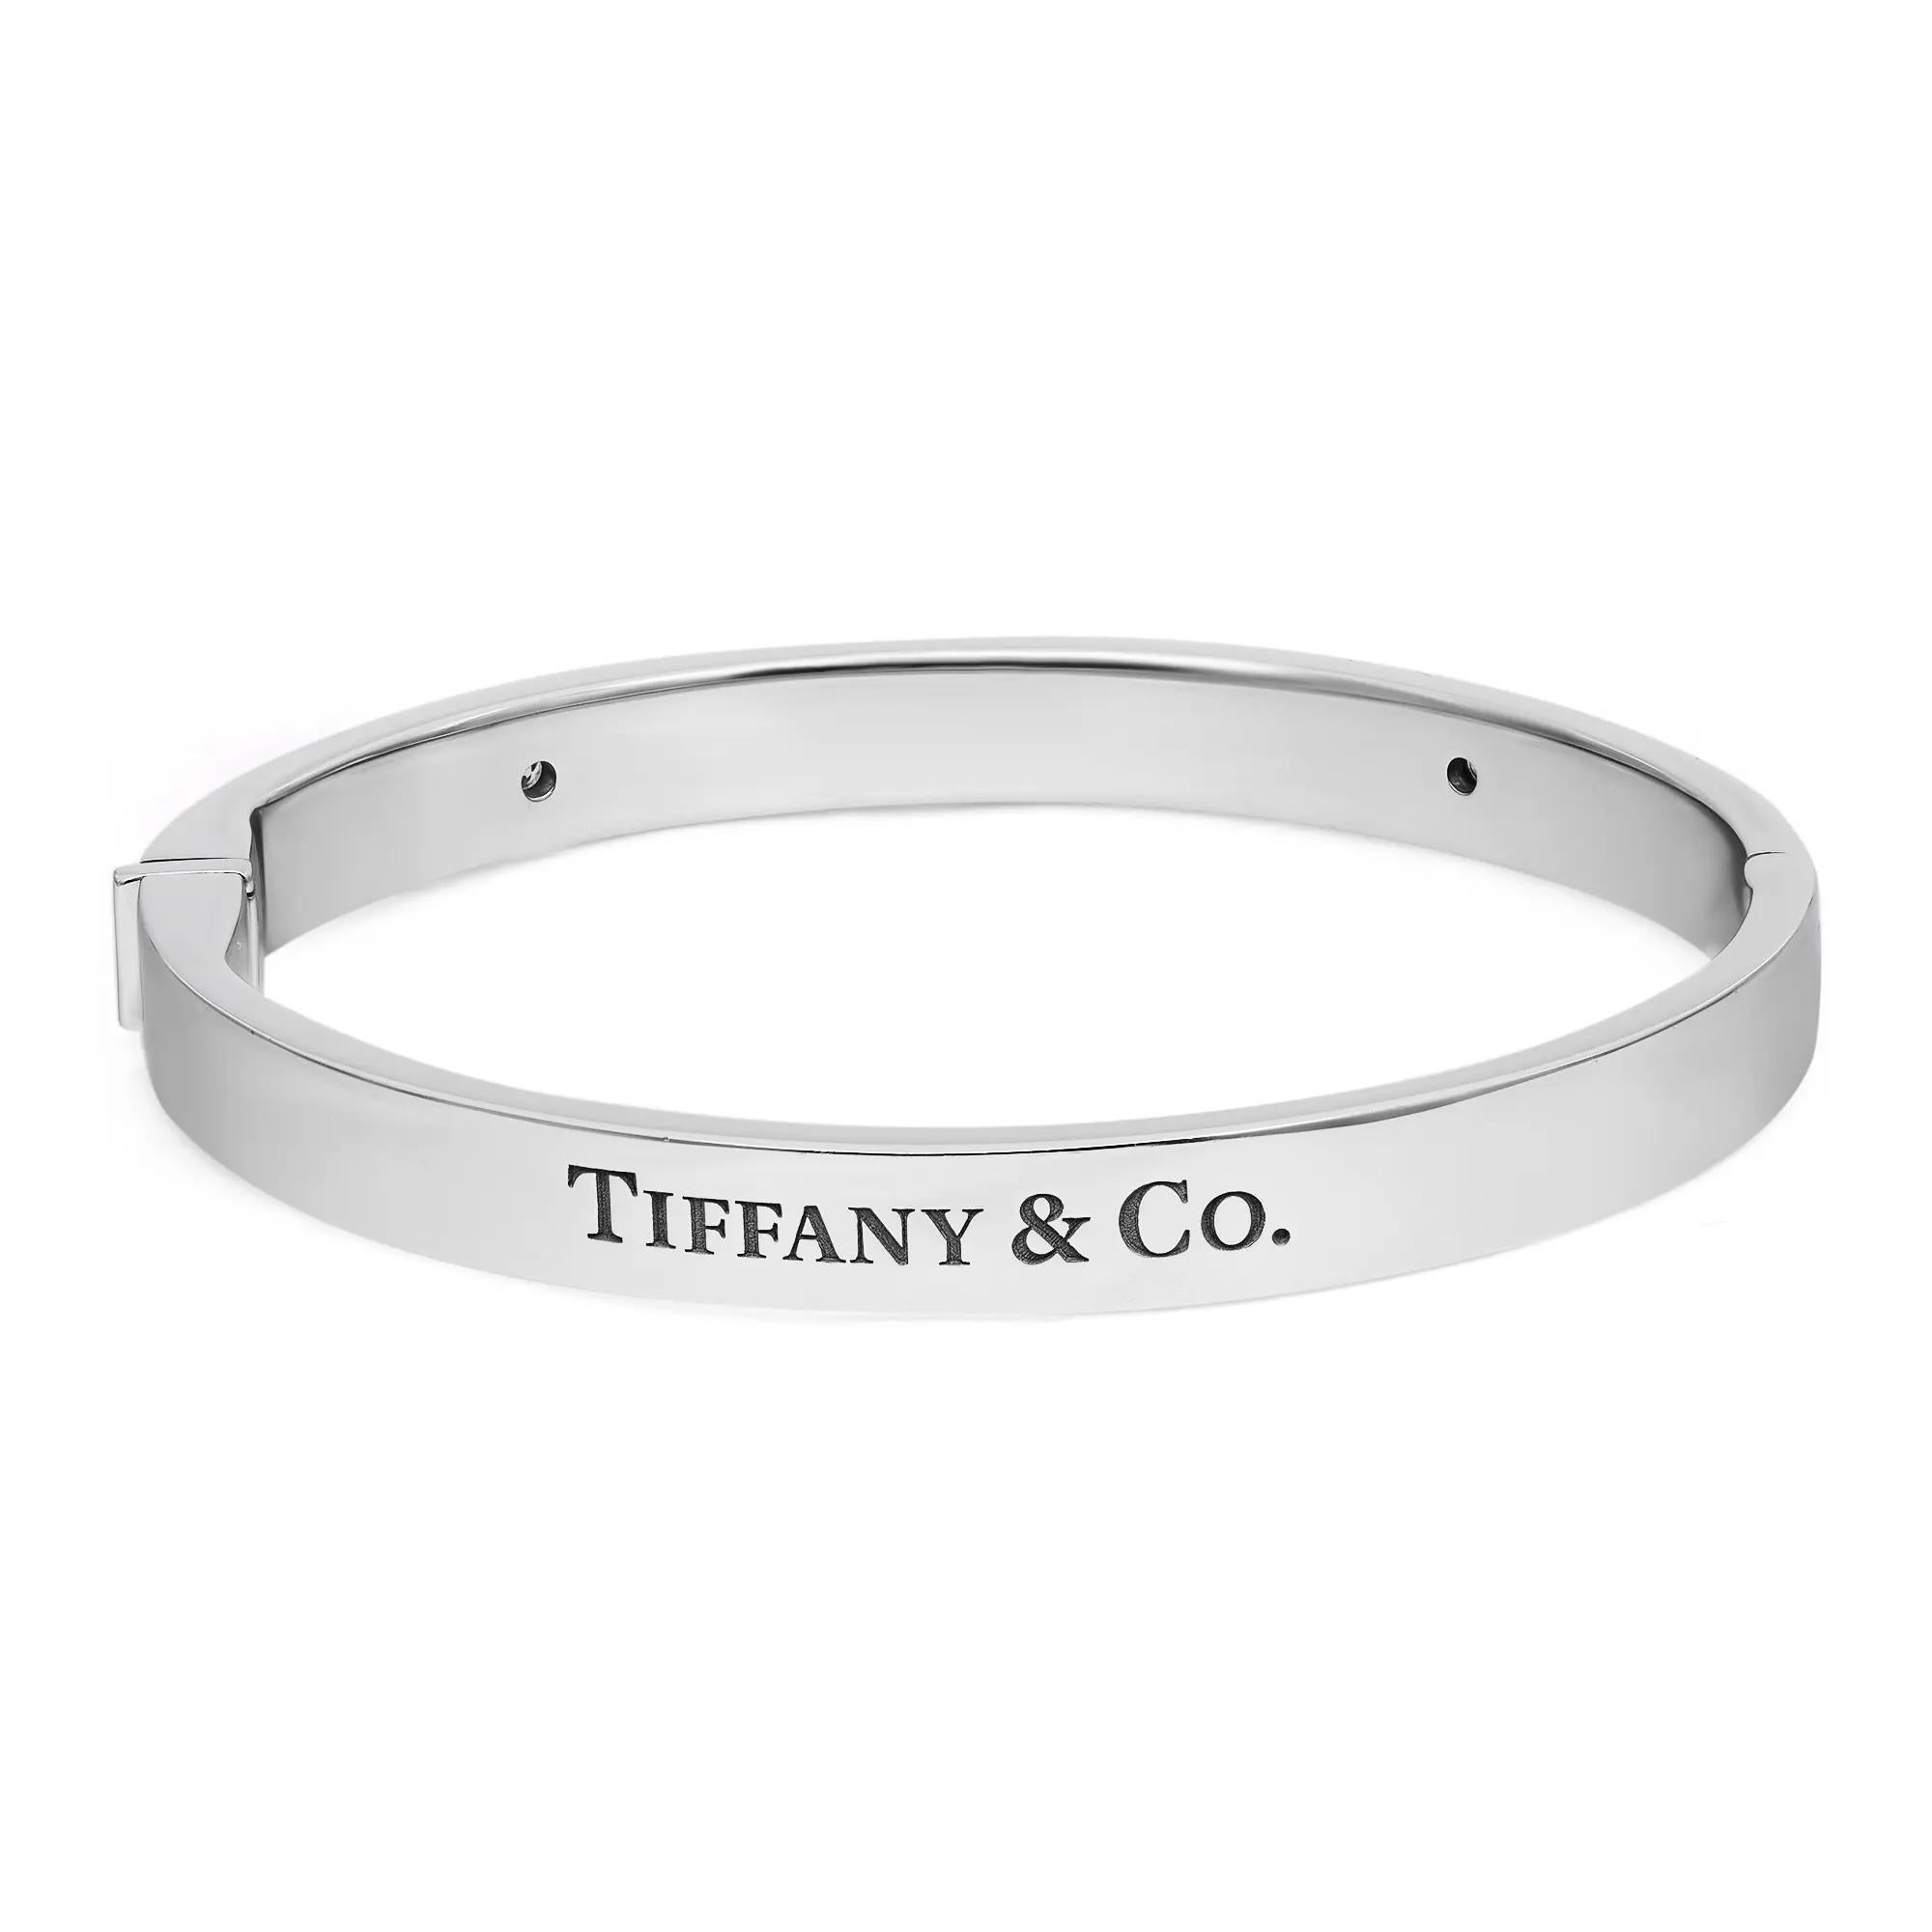 Bold and beautiful, this Tiffany & Co. Two Diamond Logo Hinged Bangle Bracelet is a true essence of jewelry aesthetics. Crafted in lustrous 18K white gold. This bracelet features an oval-shaped hinged bangle studded with 2 round brilliant cut